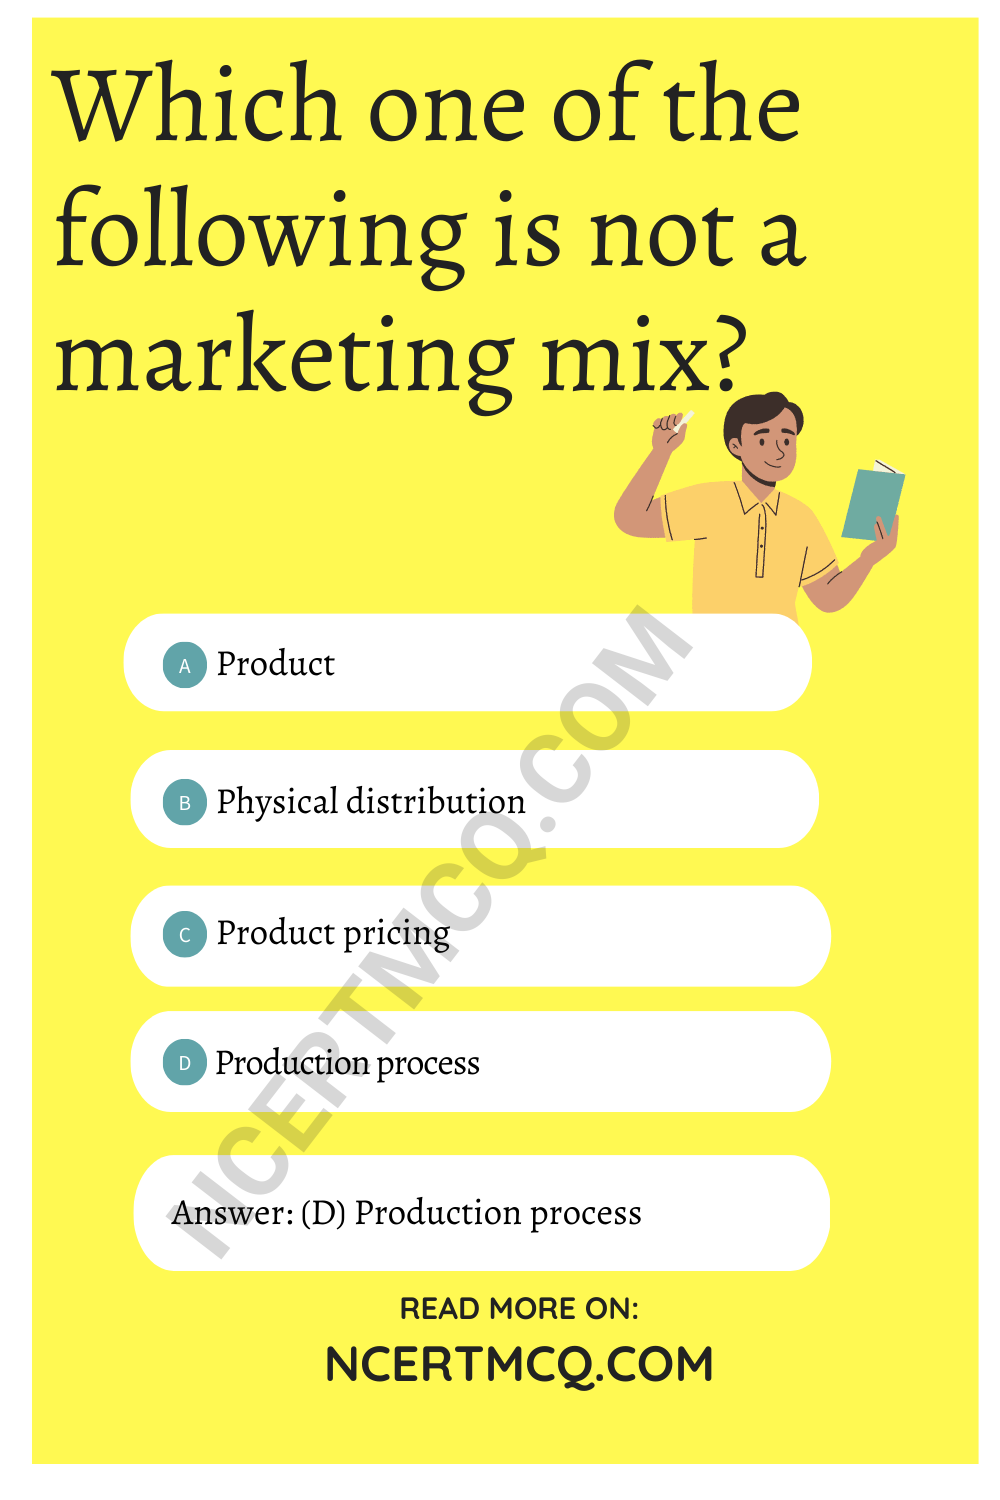 Which one of the following is not a marketing mix?